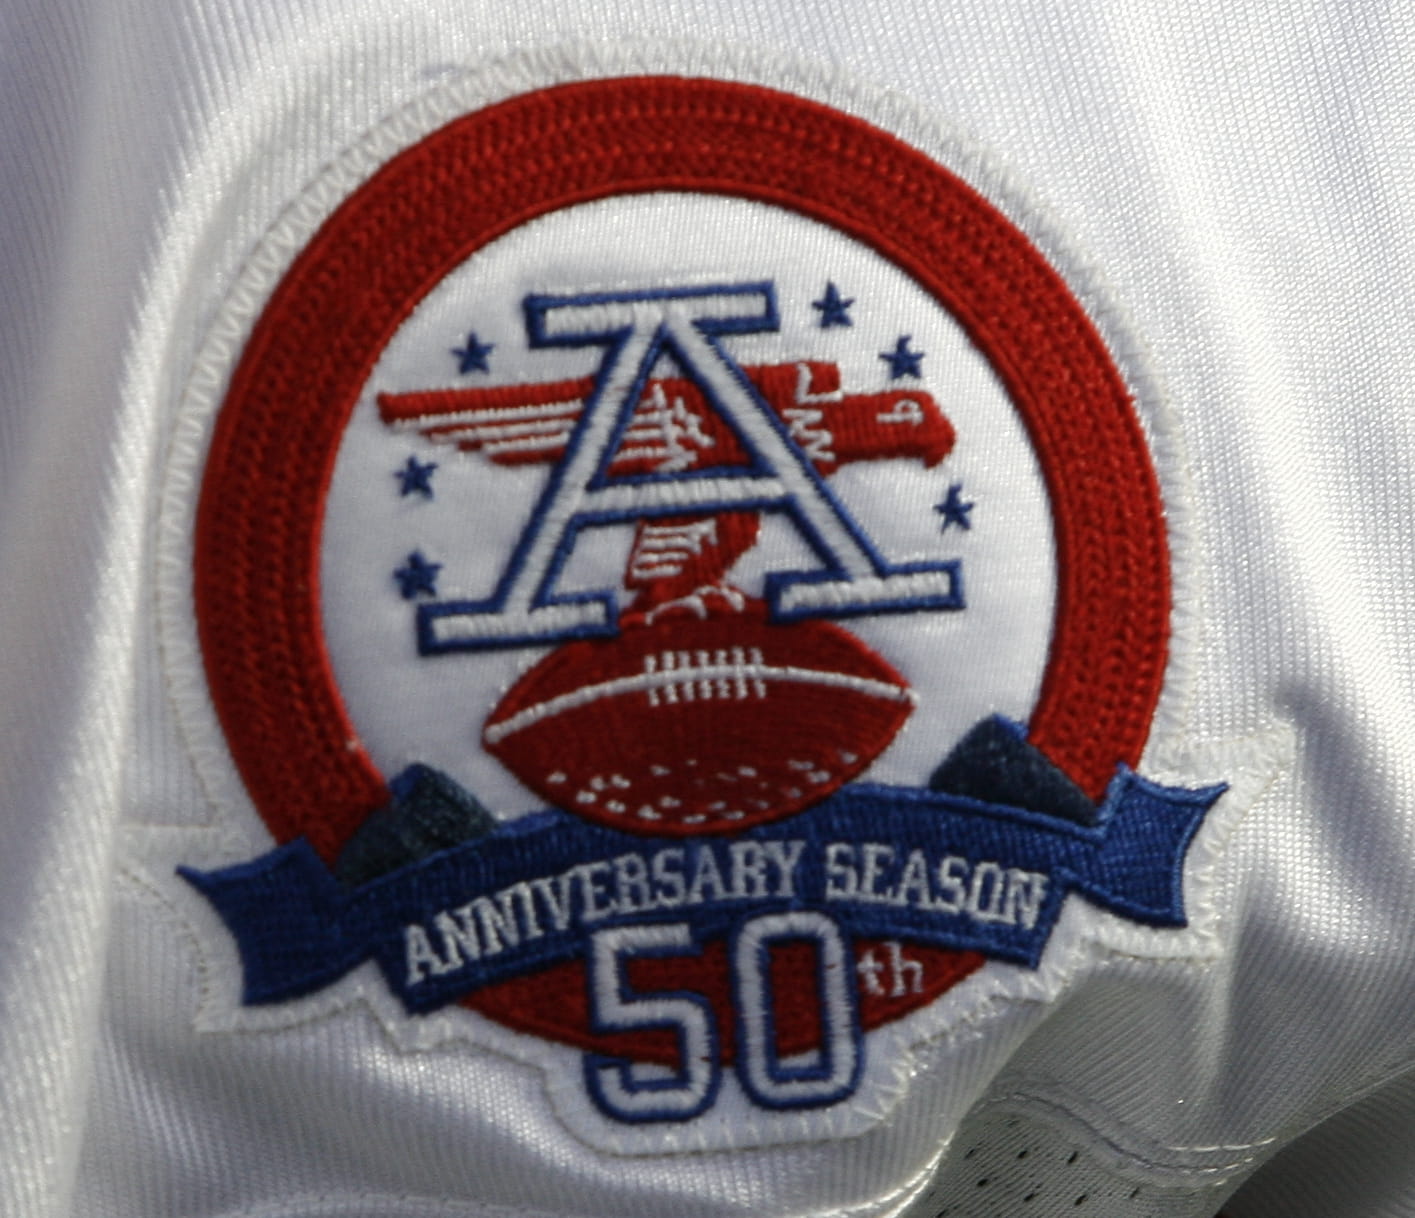 The AFL 50th anniversary logo on a Buffalo Bills uniform before a game against the New England Patriots in September 2009.